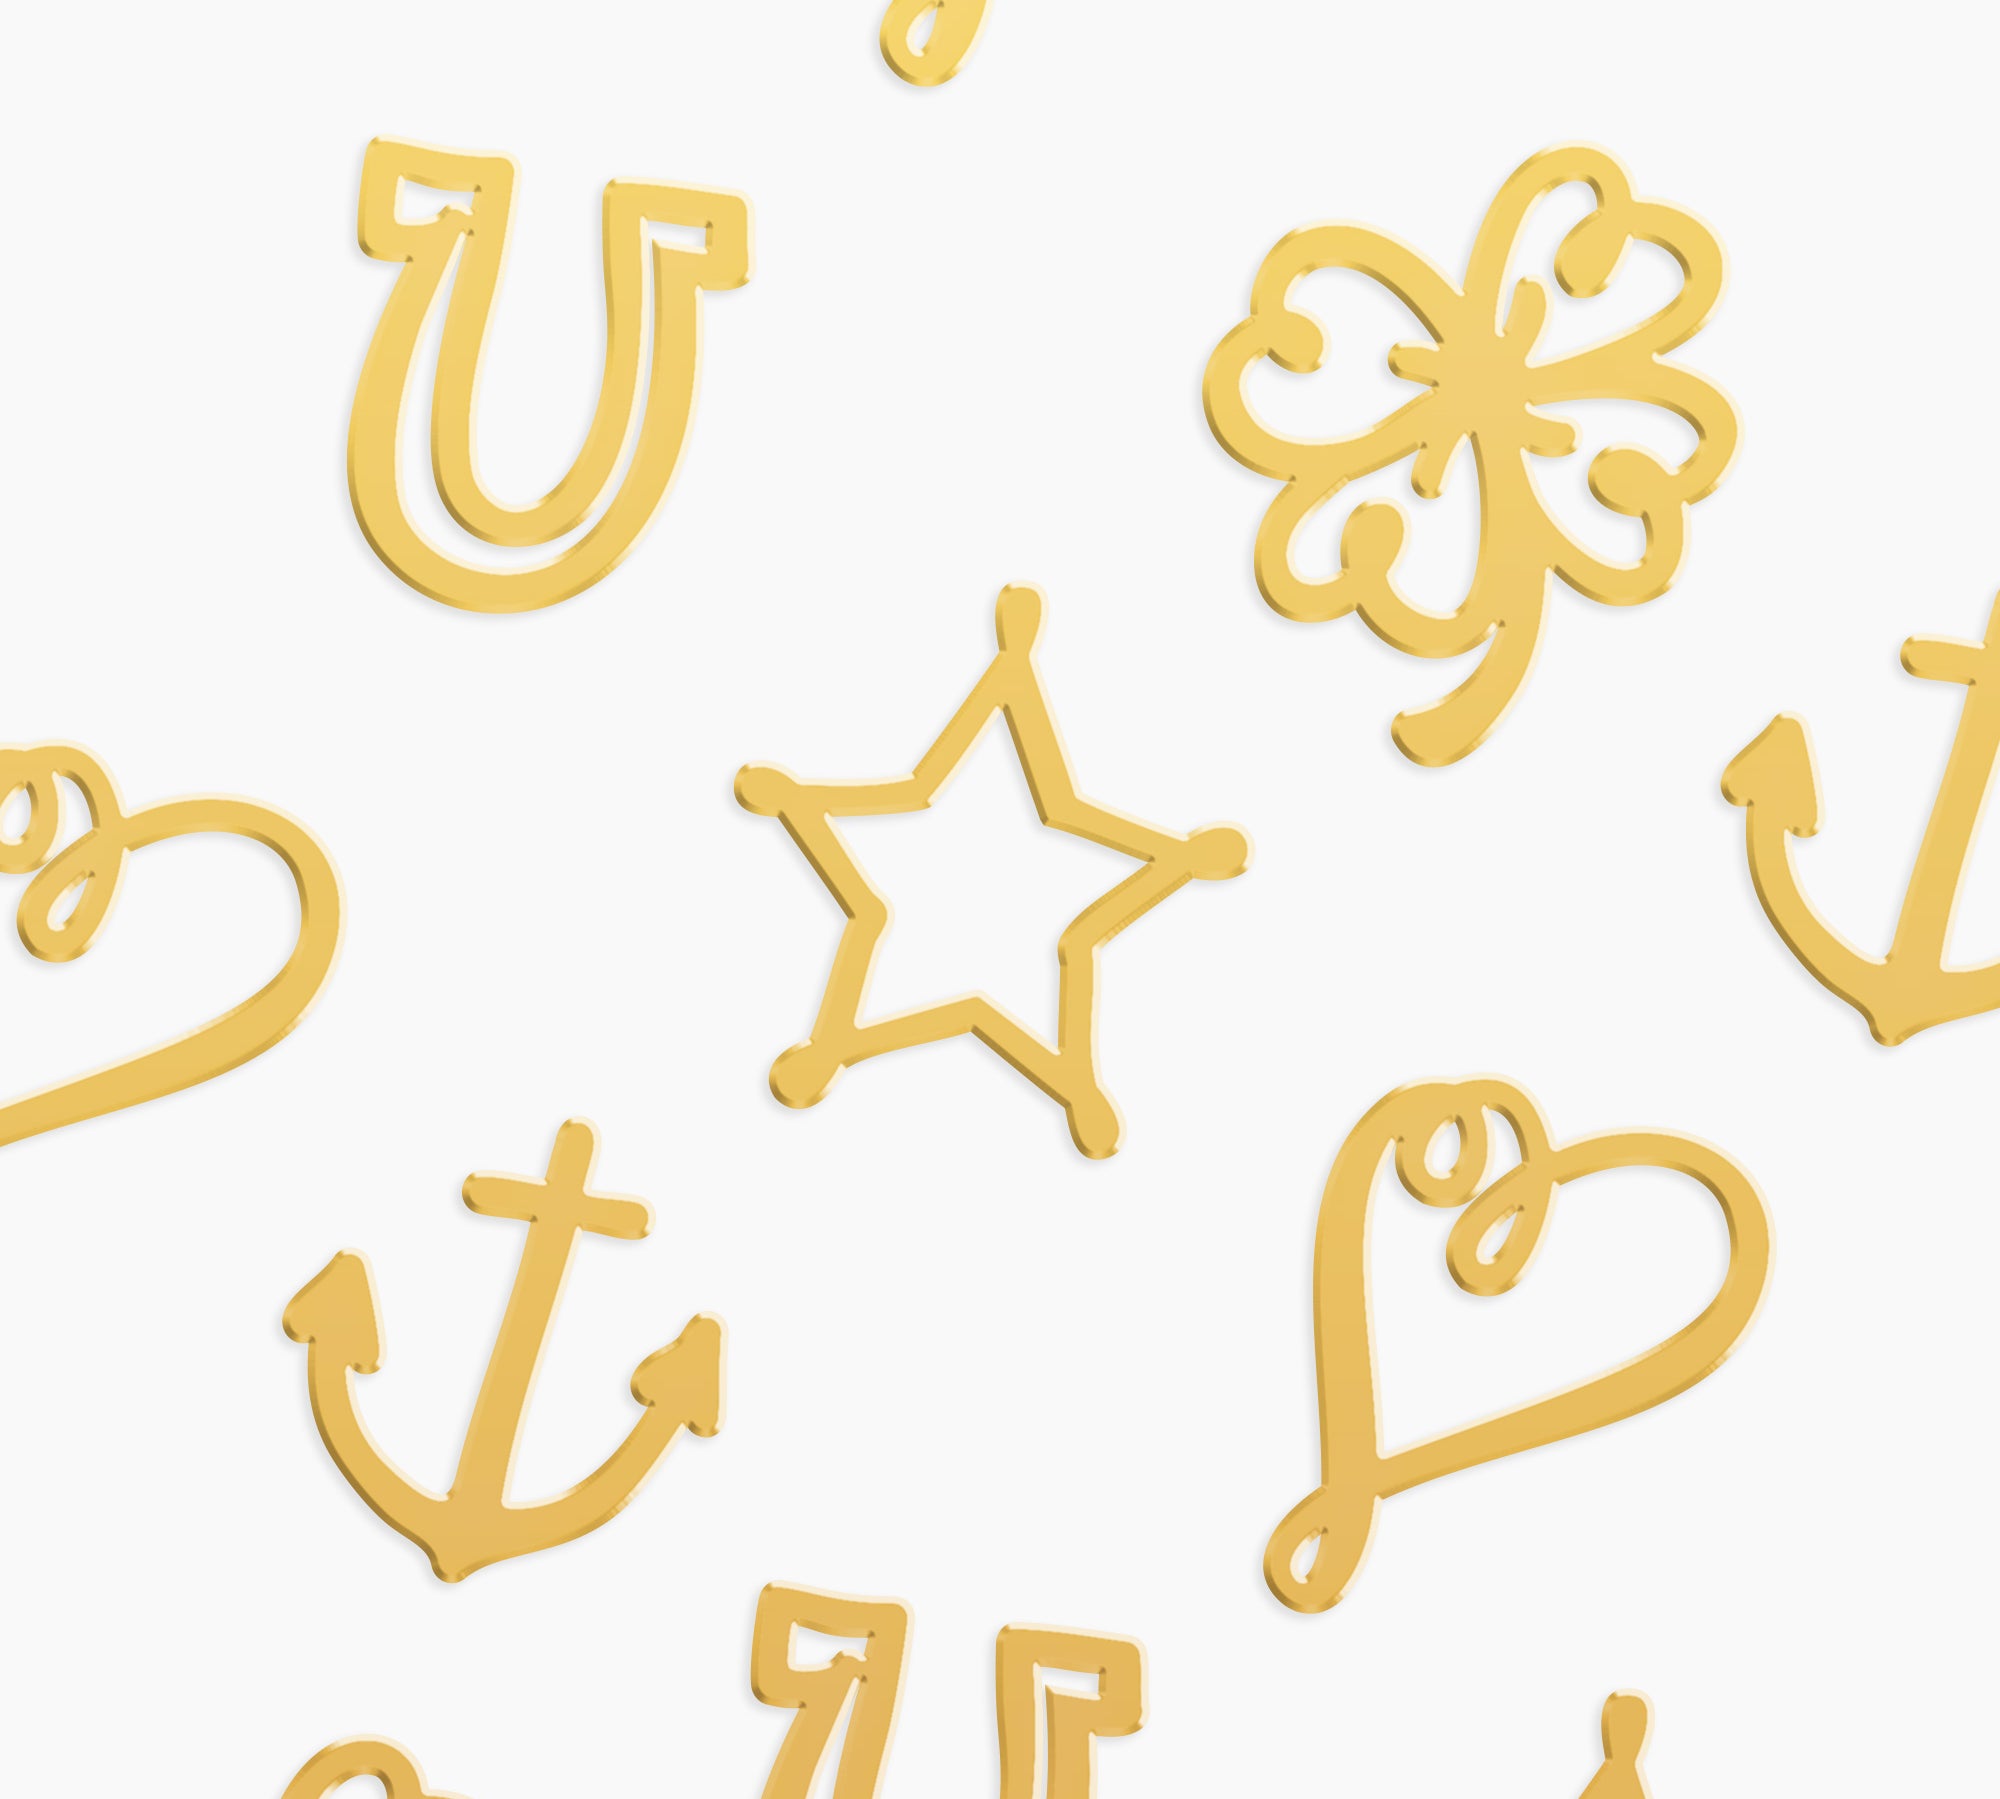 Individual Charms for a Custom Locket - High Quality, Affordable Whimsical Hand Drawn Anchor, Heart, Clover, Star and Horseshoe Charms - Available in Gold and Silver - Made in USA - Brevity Jewelry